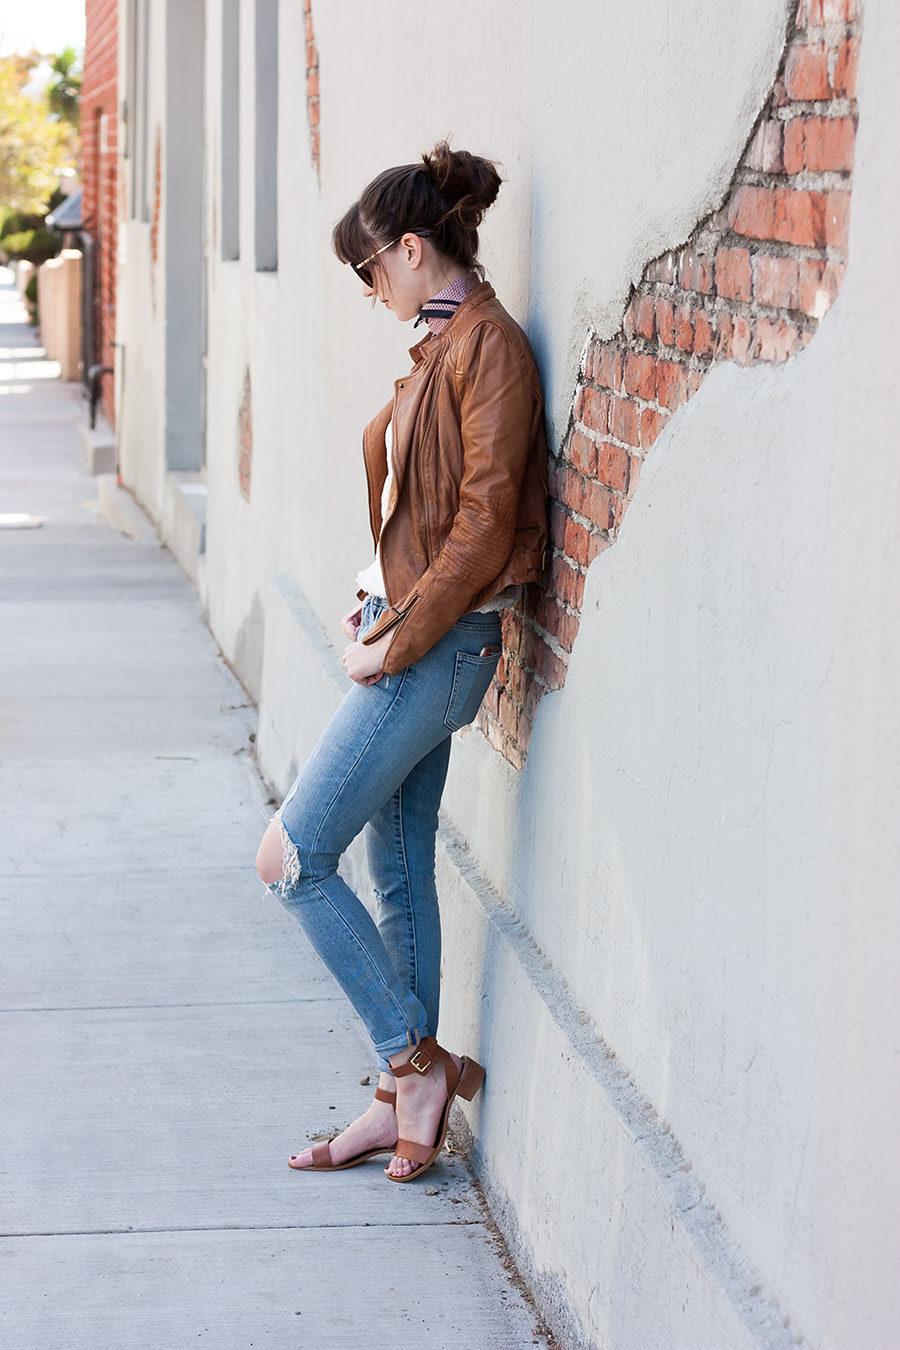 Zara Leather Jacket, Ripped Jeans, Tan Leather Sandals outfit